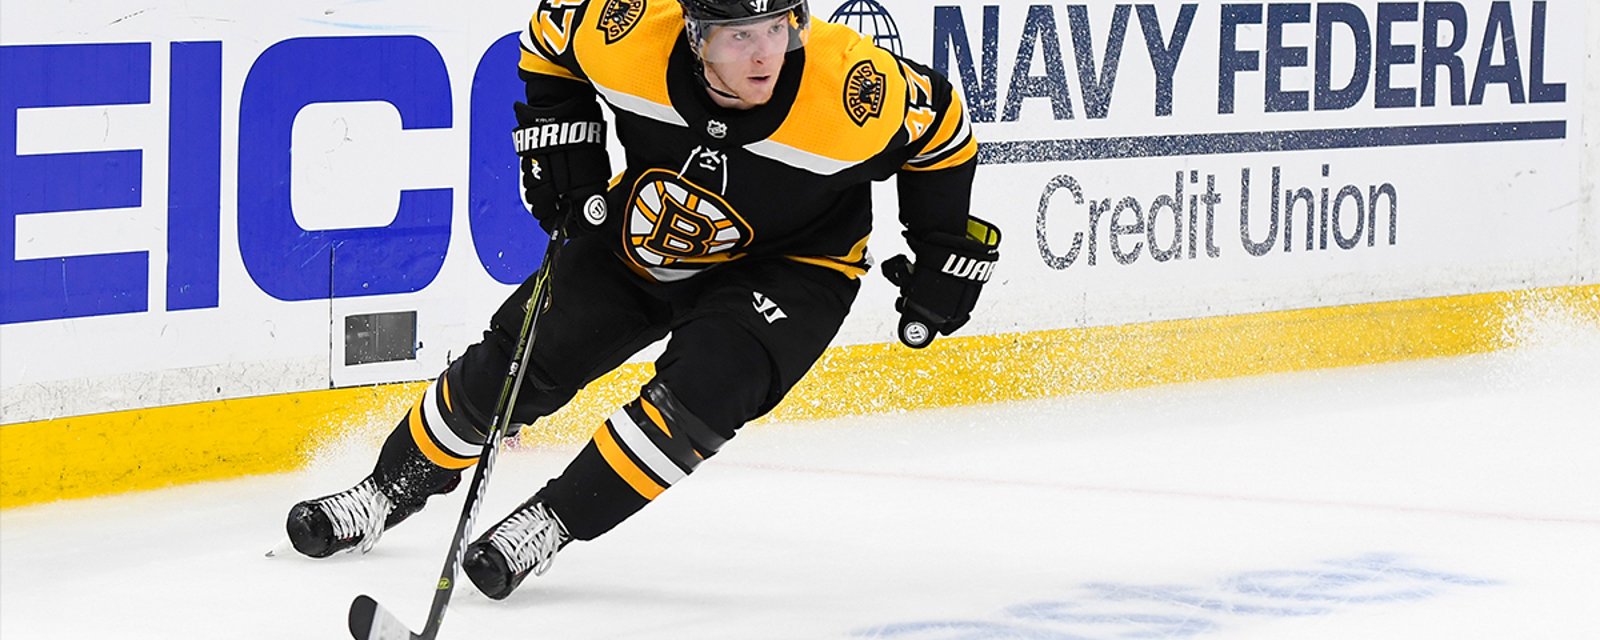 Bruins GM Don Sweeney discusses the possibility of trading Torey Krug